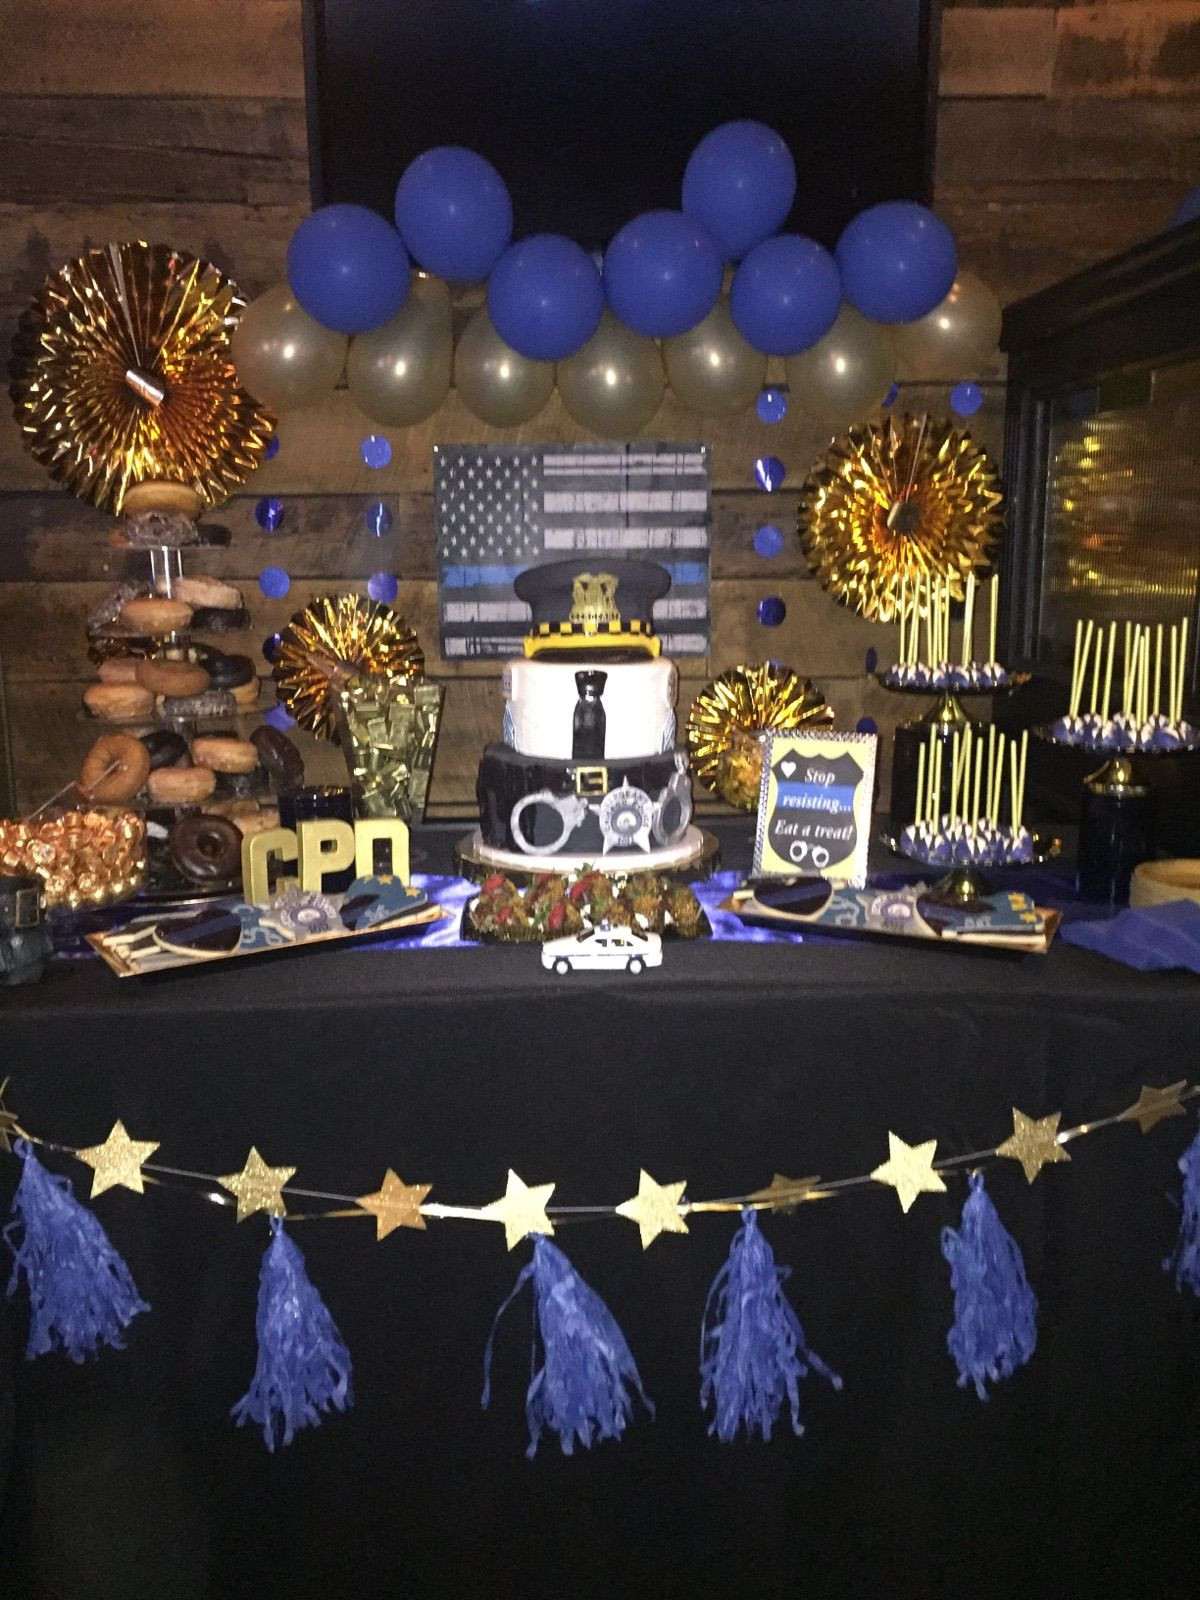 Police Graduation Party Ideas
 Police promotional party dessert table sweet table